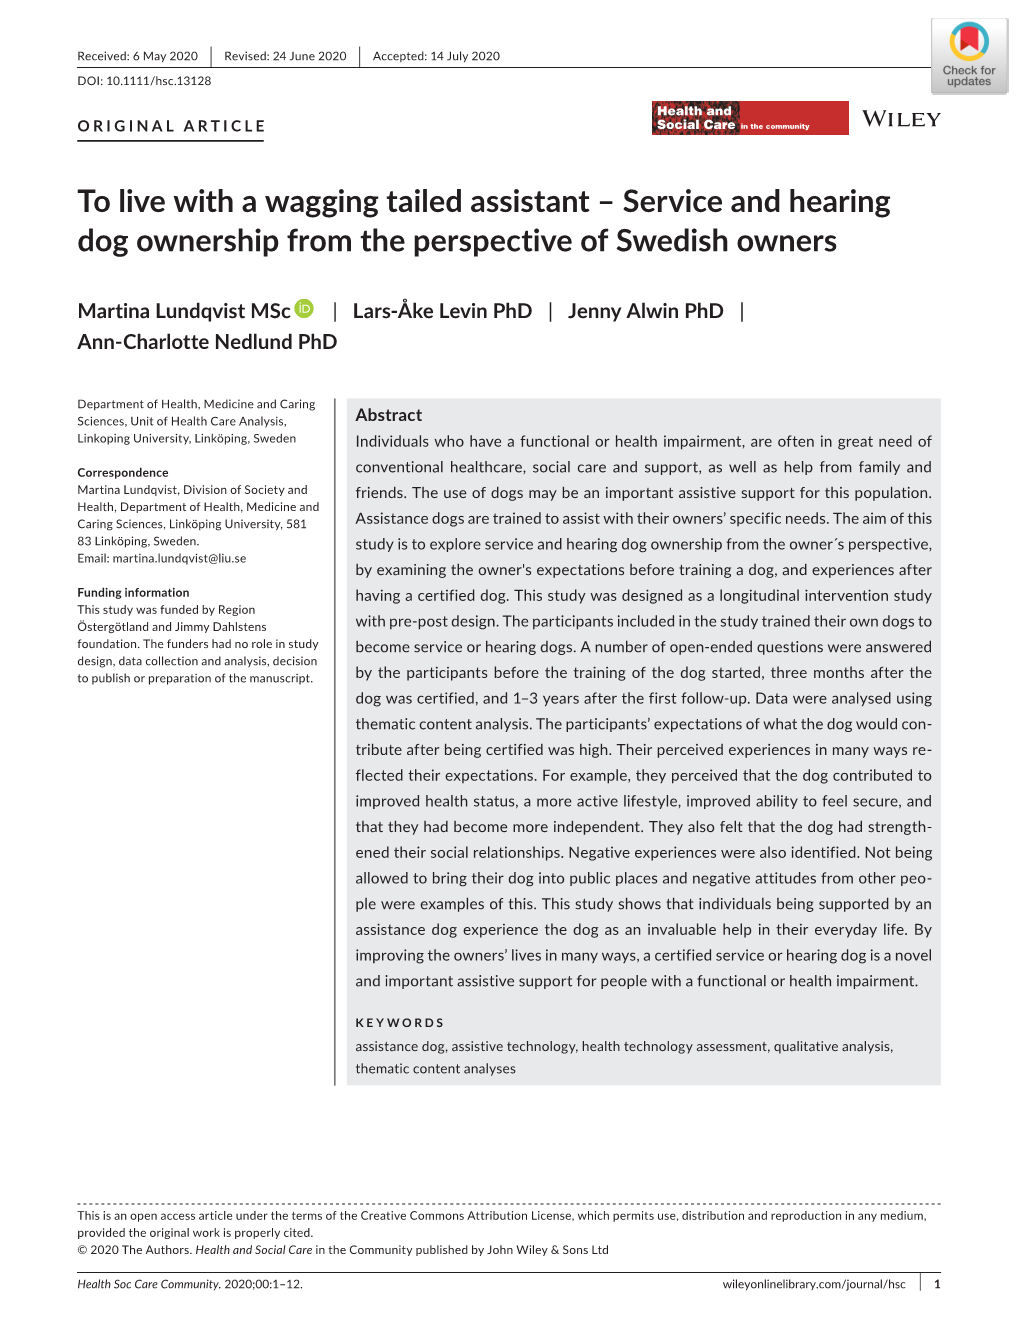 To Live with a Wagging Tailed Assistant – Service and Hearing Dog Ownership from the Perspective of Swedish Owners